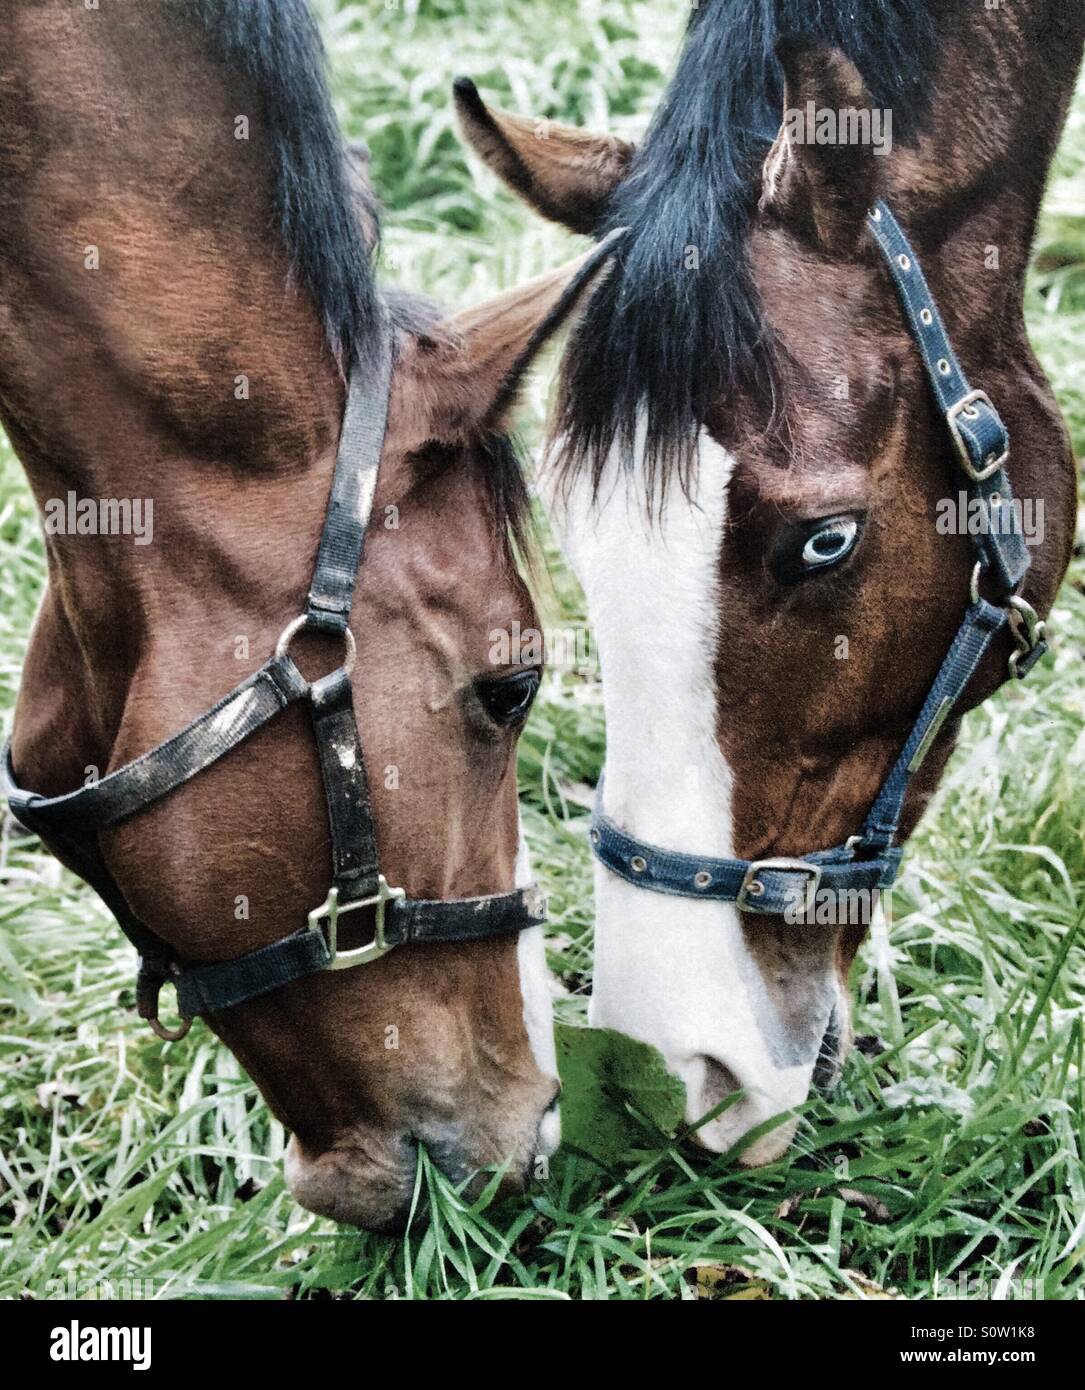 Two thoroughbred horses grazing head to head Stock Photo